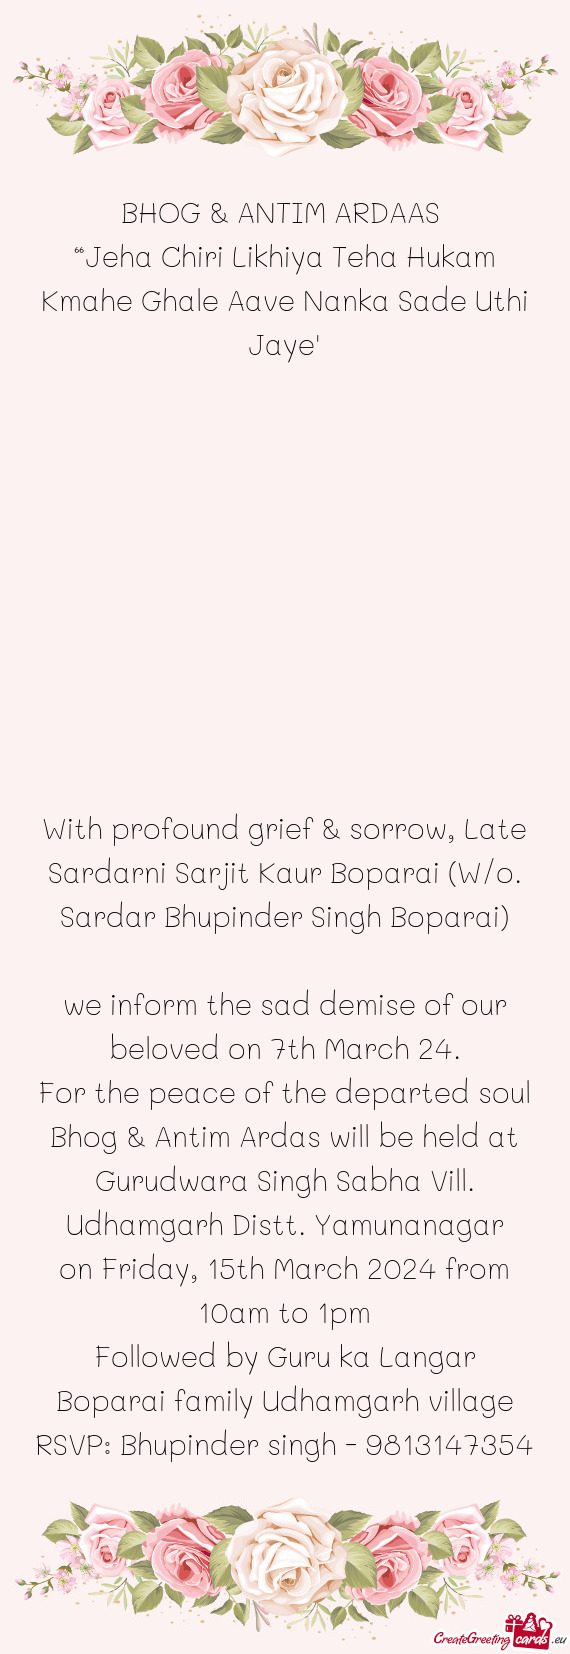 We inform the sad demise of our beloved on 7th March 24